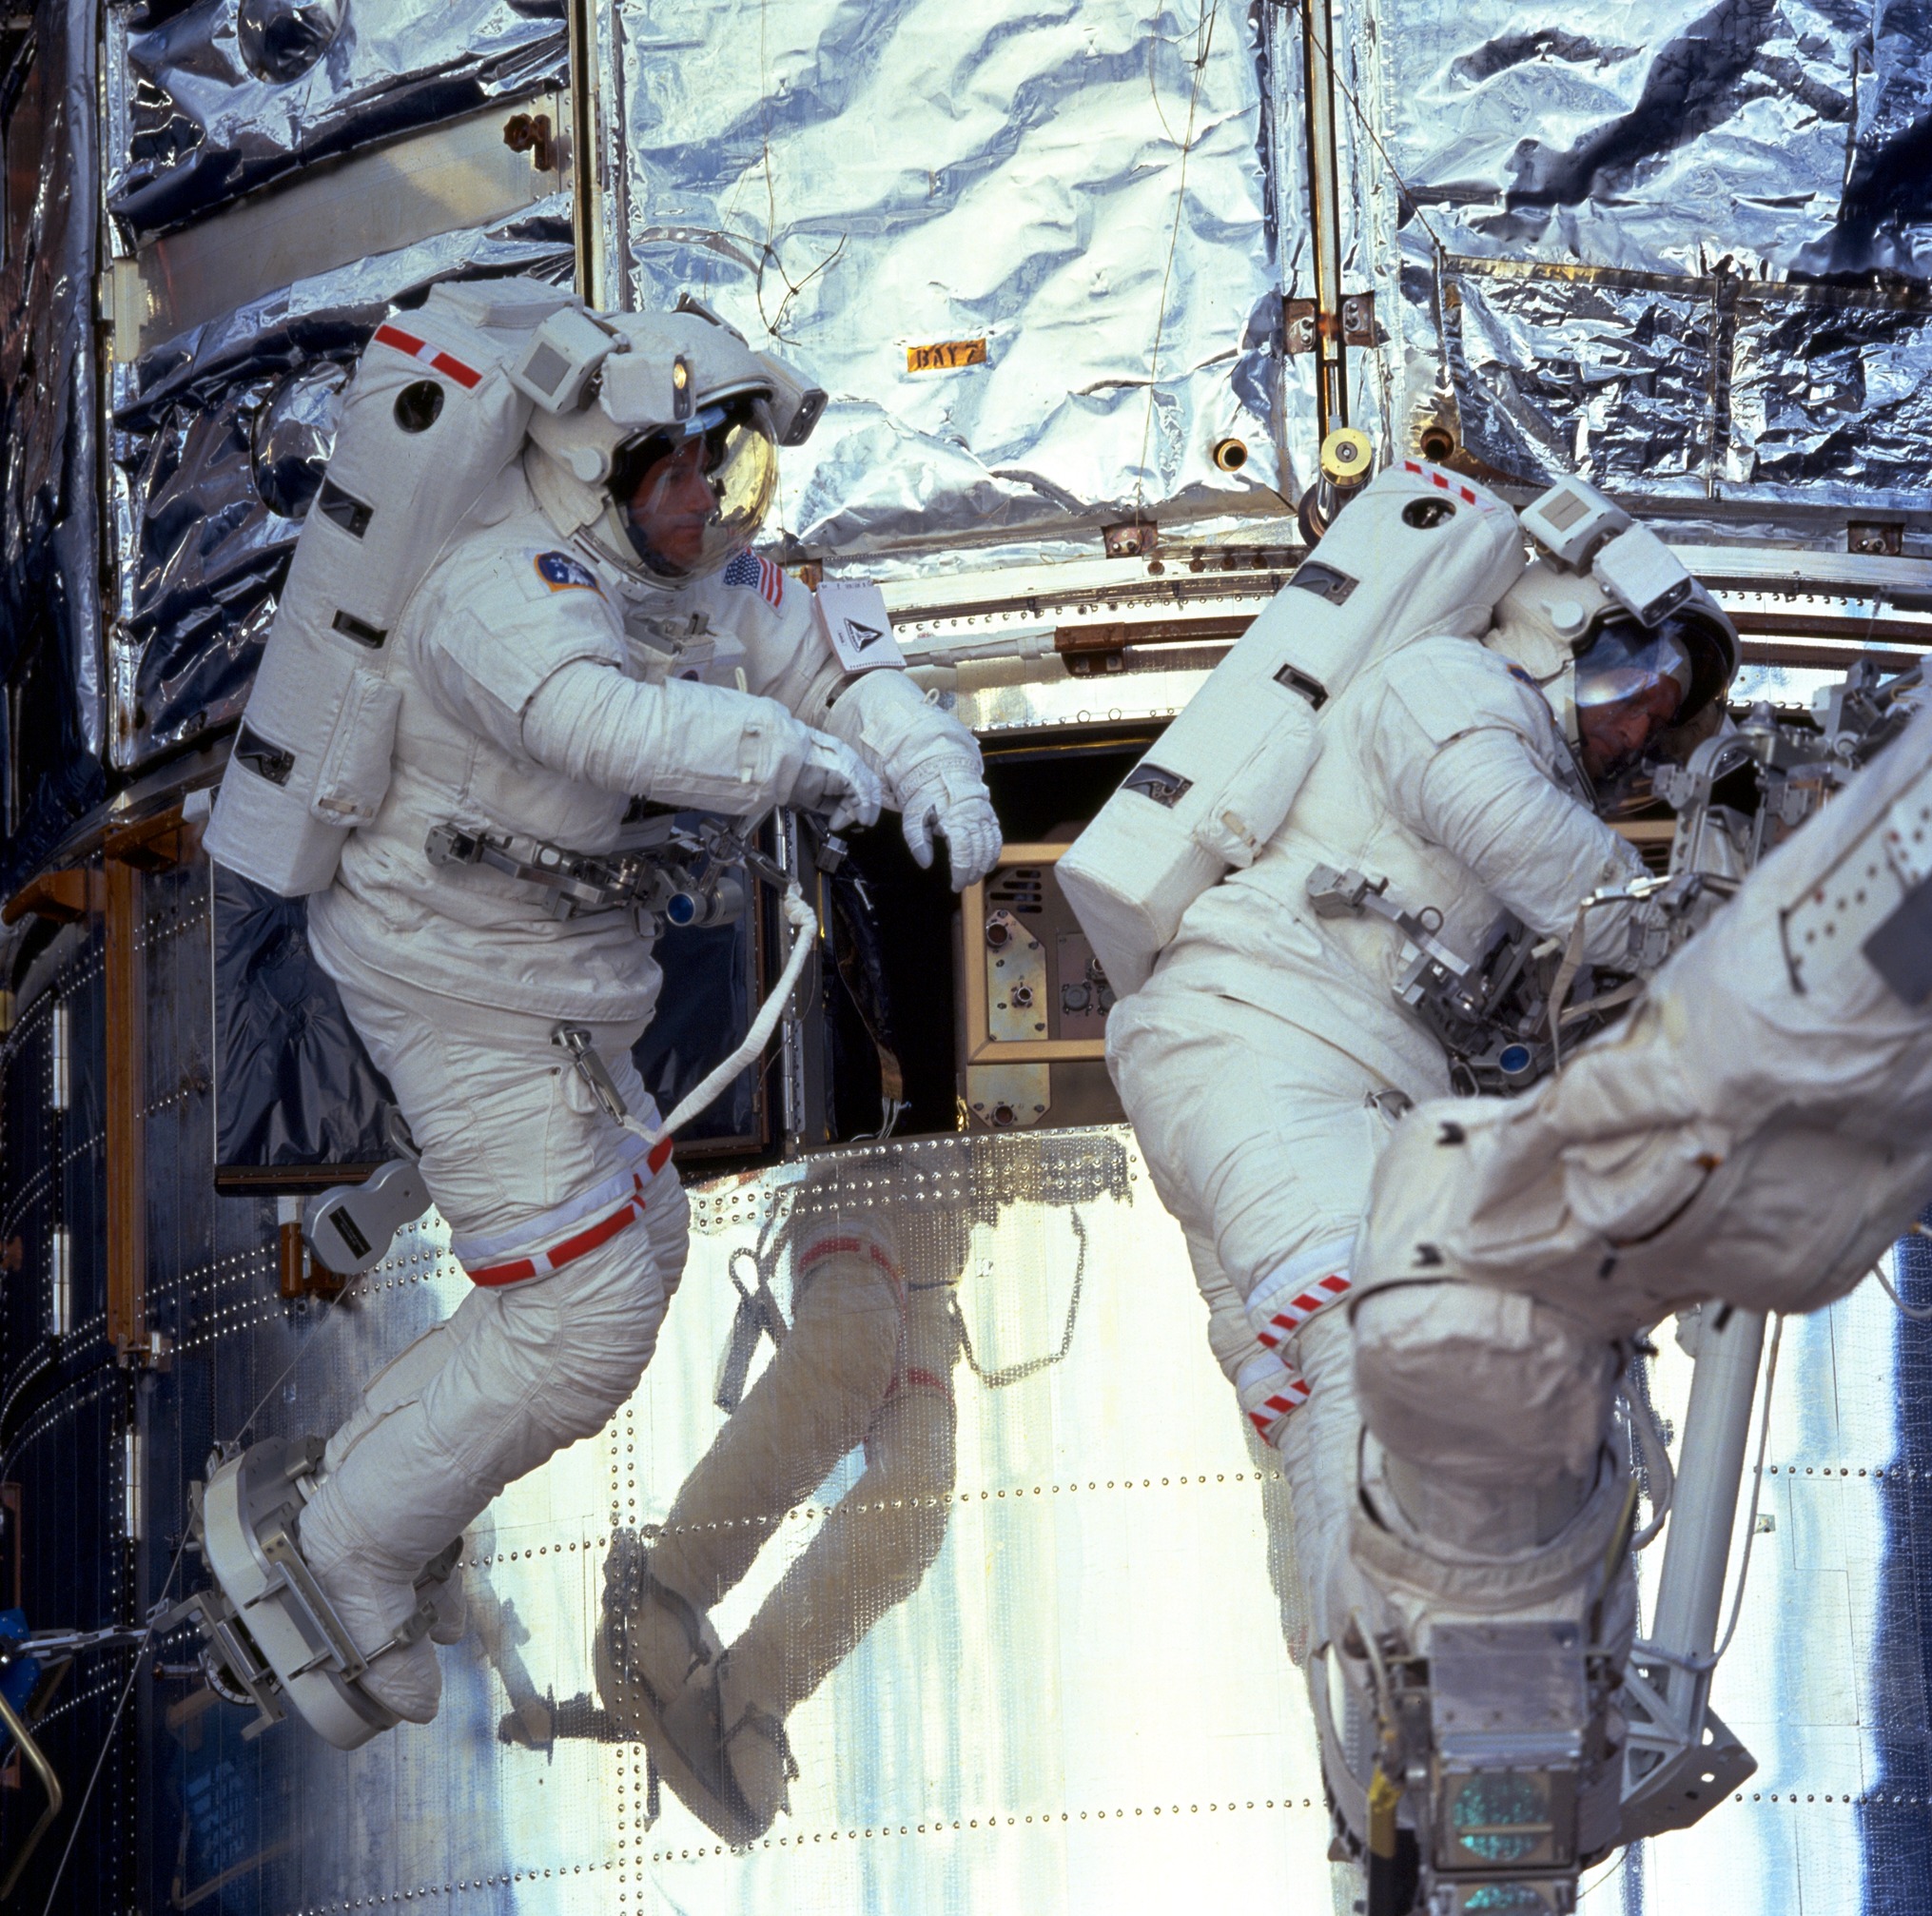 Two astronauts replacing hardware on the telescope.